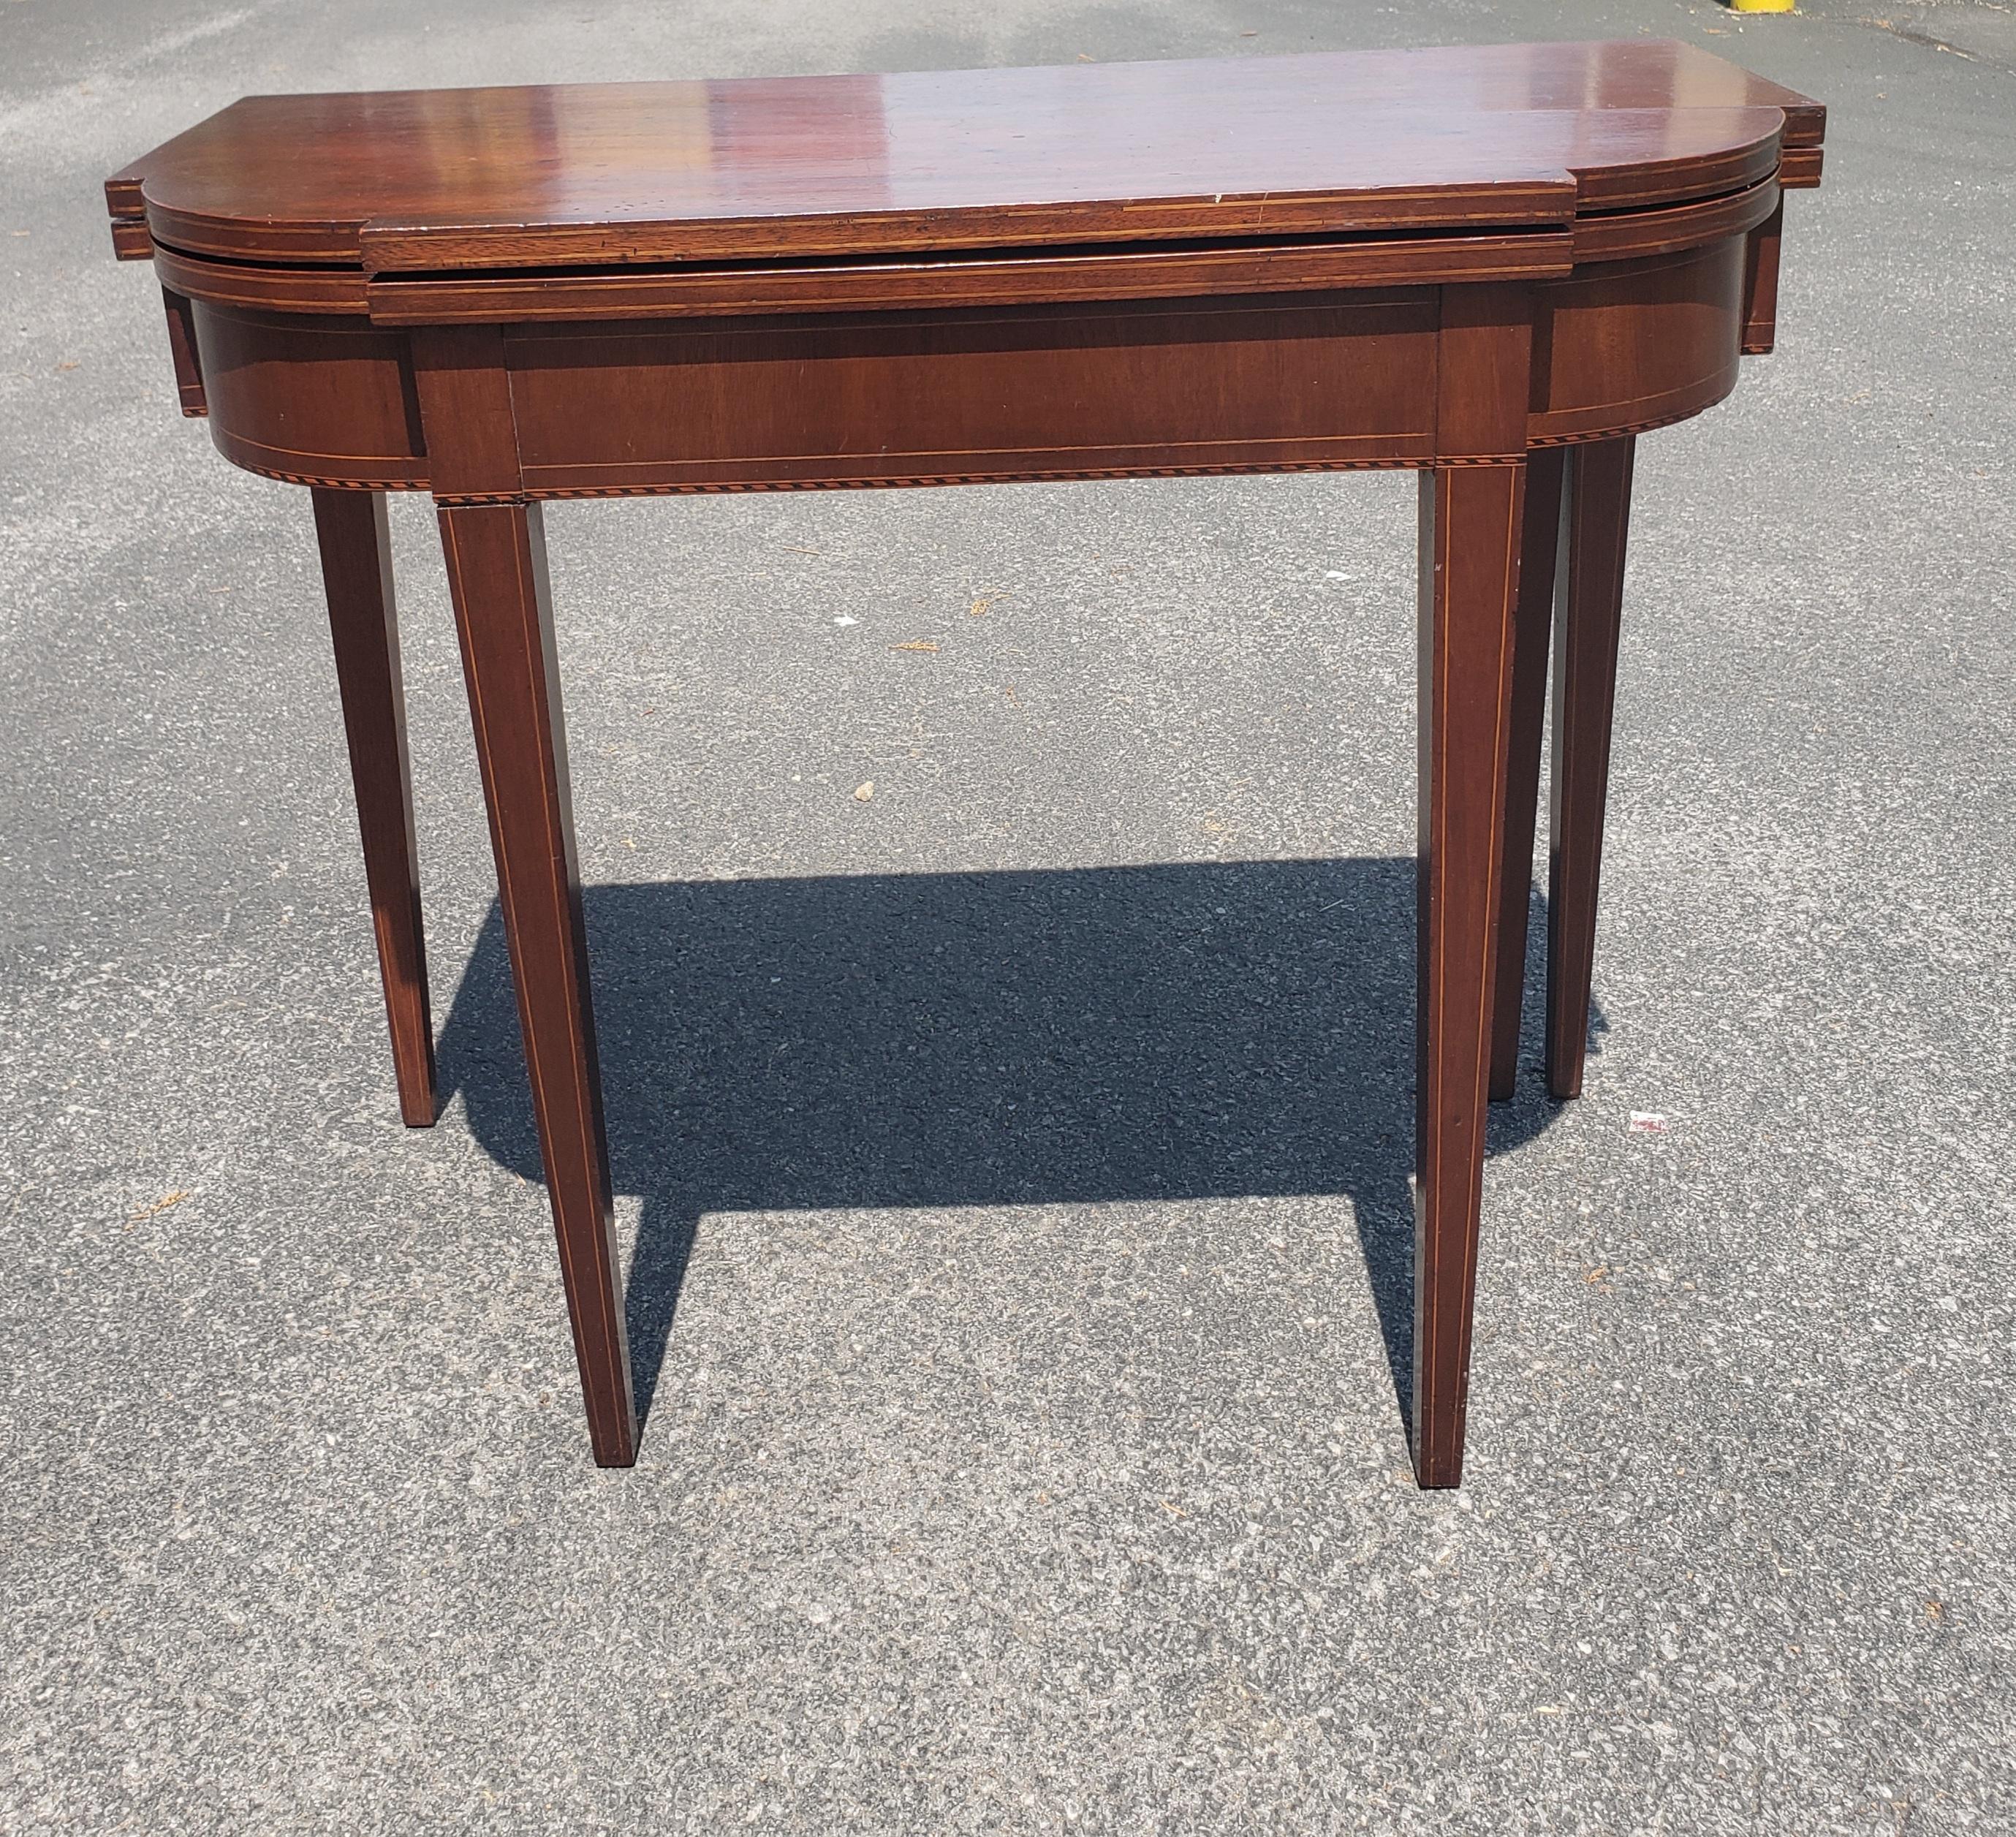 An Early 20th century Mahogany and satinwood Inlaid Federal style Fold-Top Console or Card Table in very good antique condition.
Measures 36